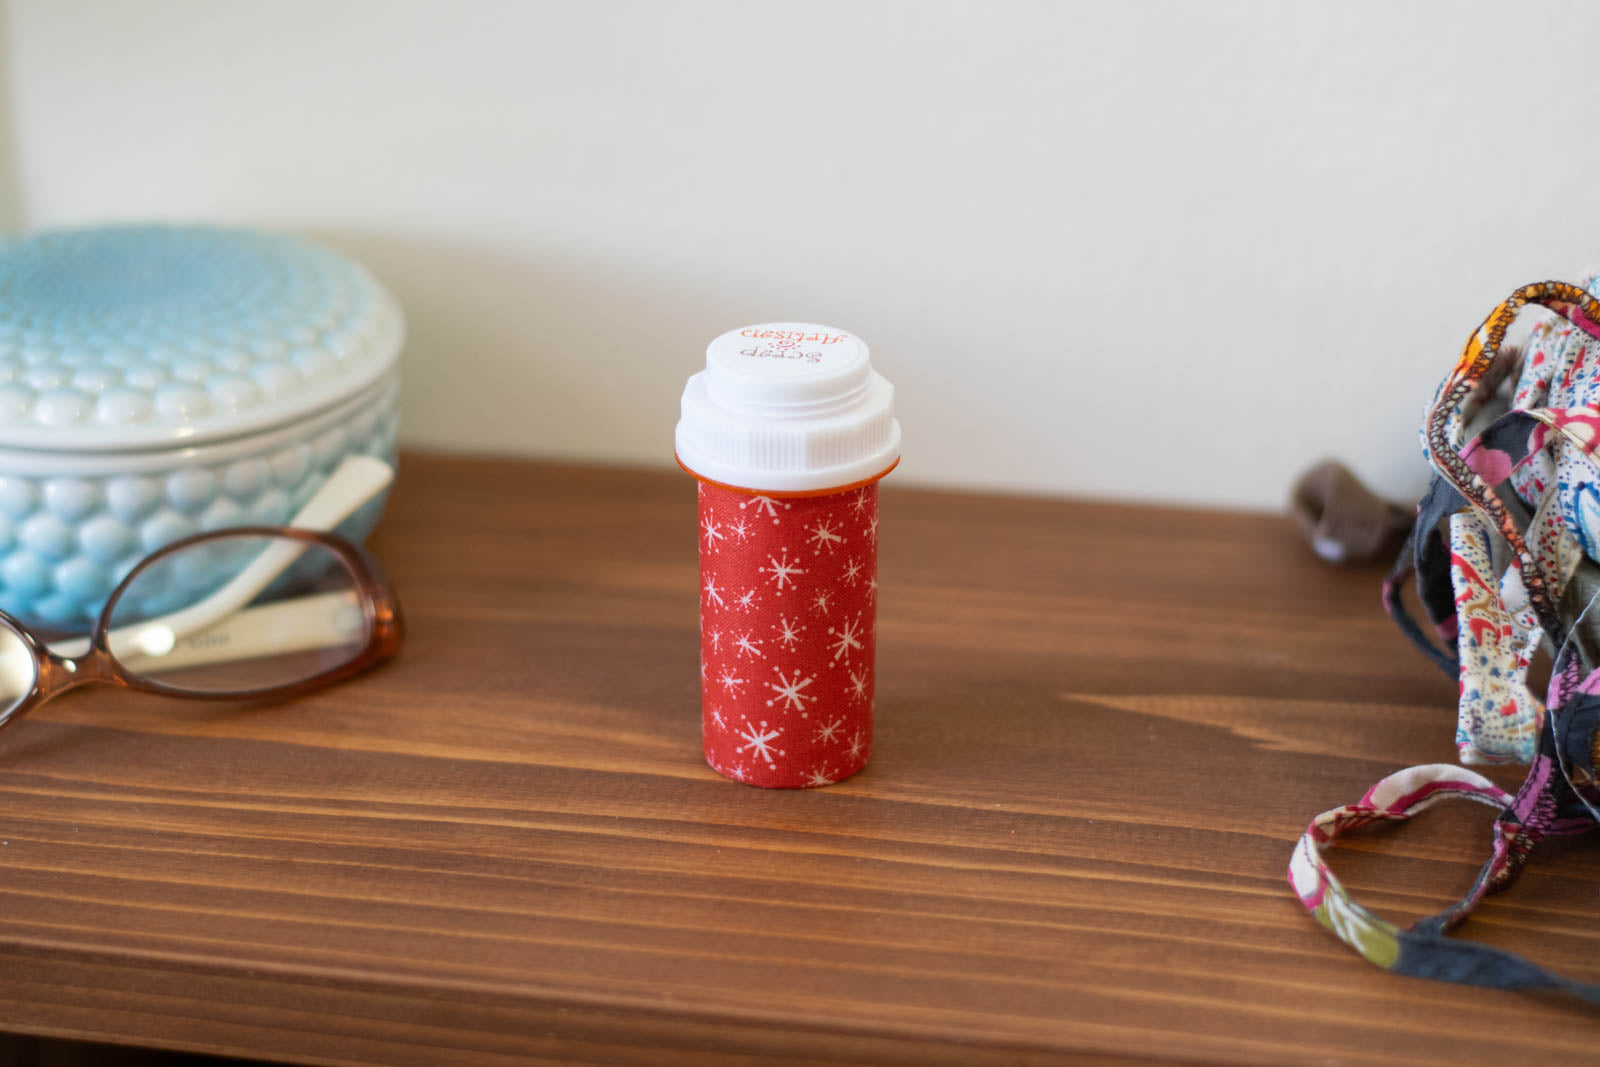 upcycled prescription bottle sewing kit — white sparkles on red, 3.25" high, closed